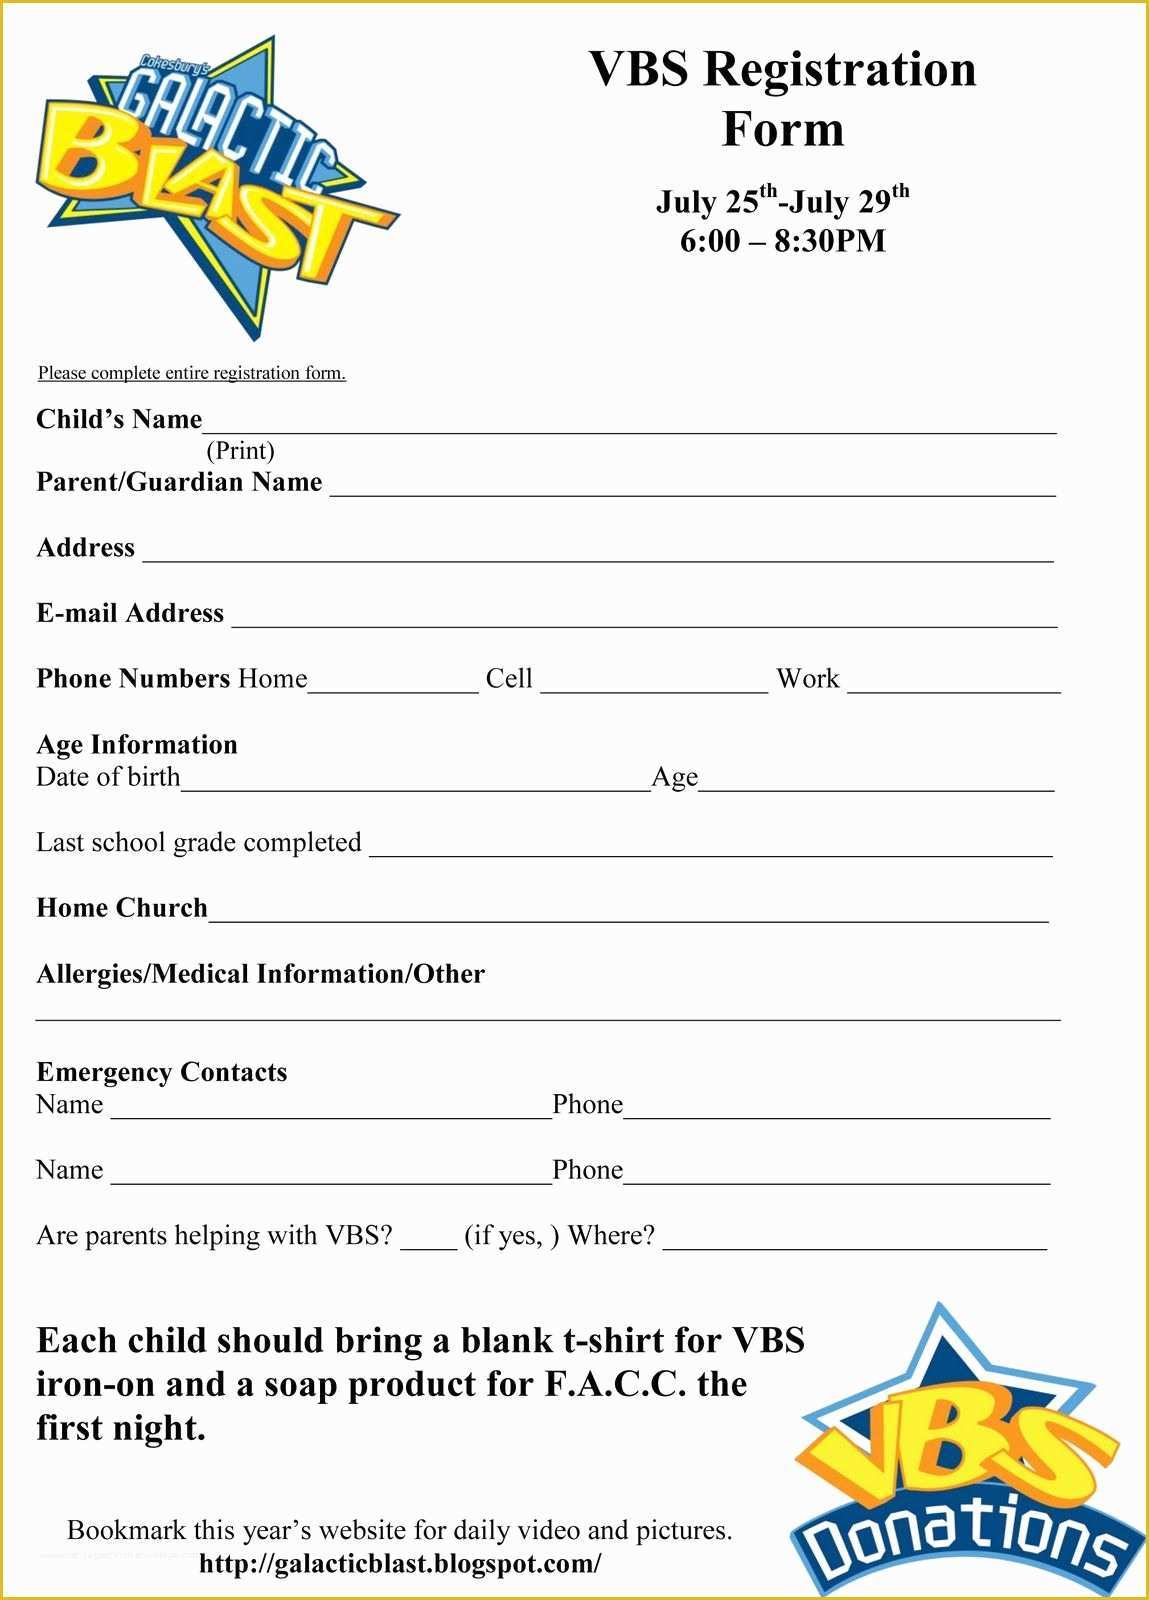 Class Registration form Template Free Of Free Vbs Registration form Template Vbs